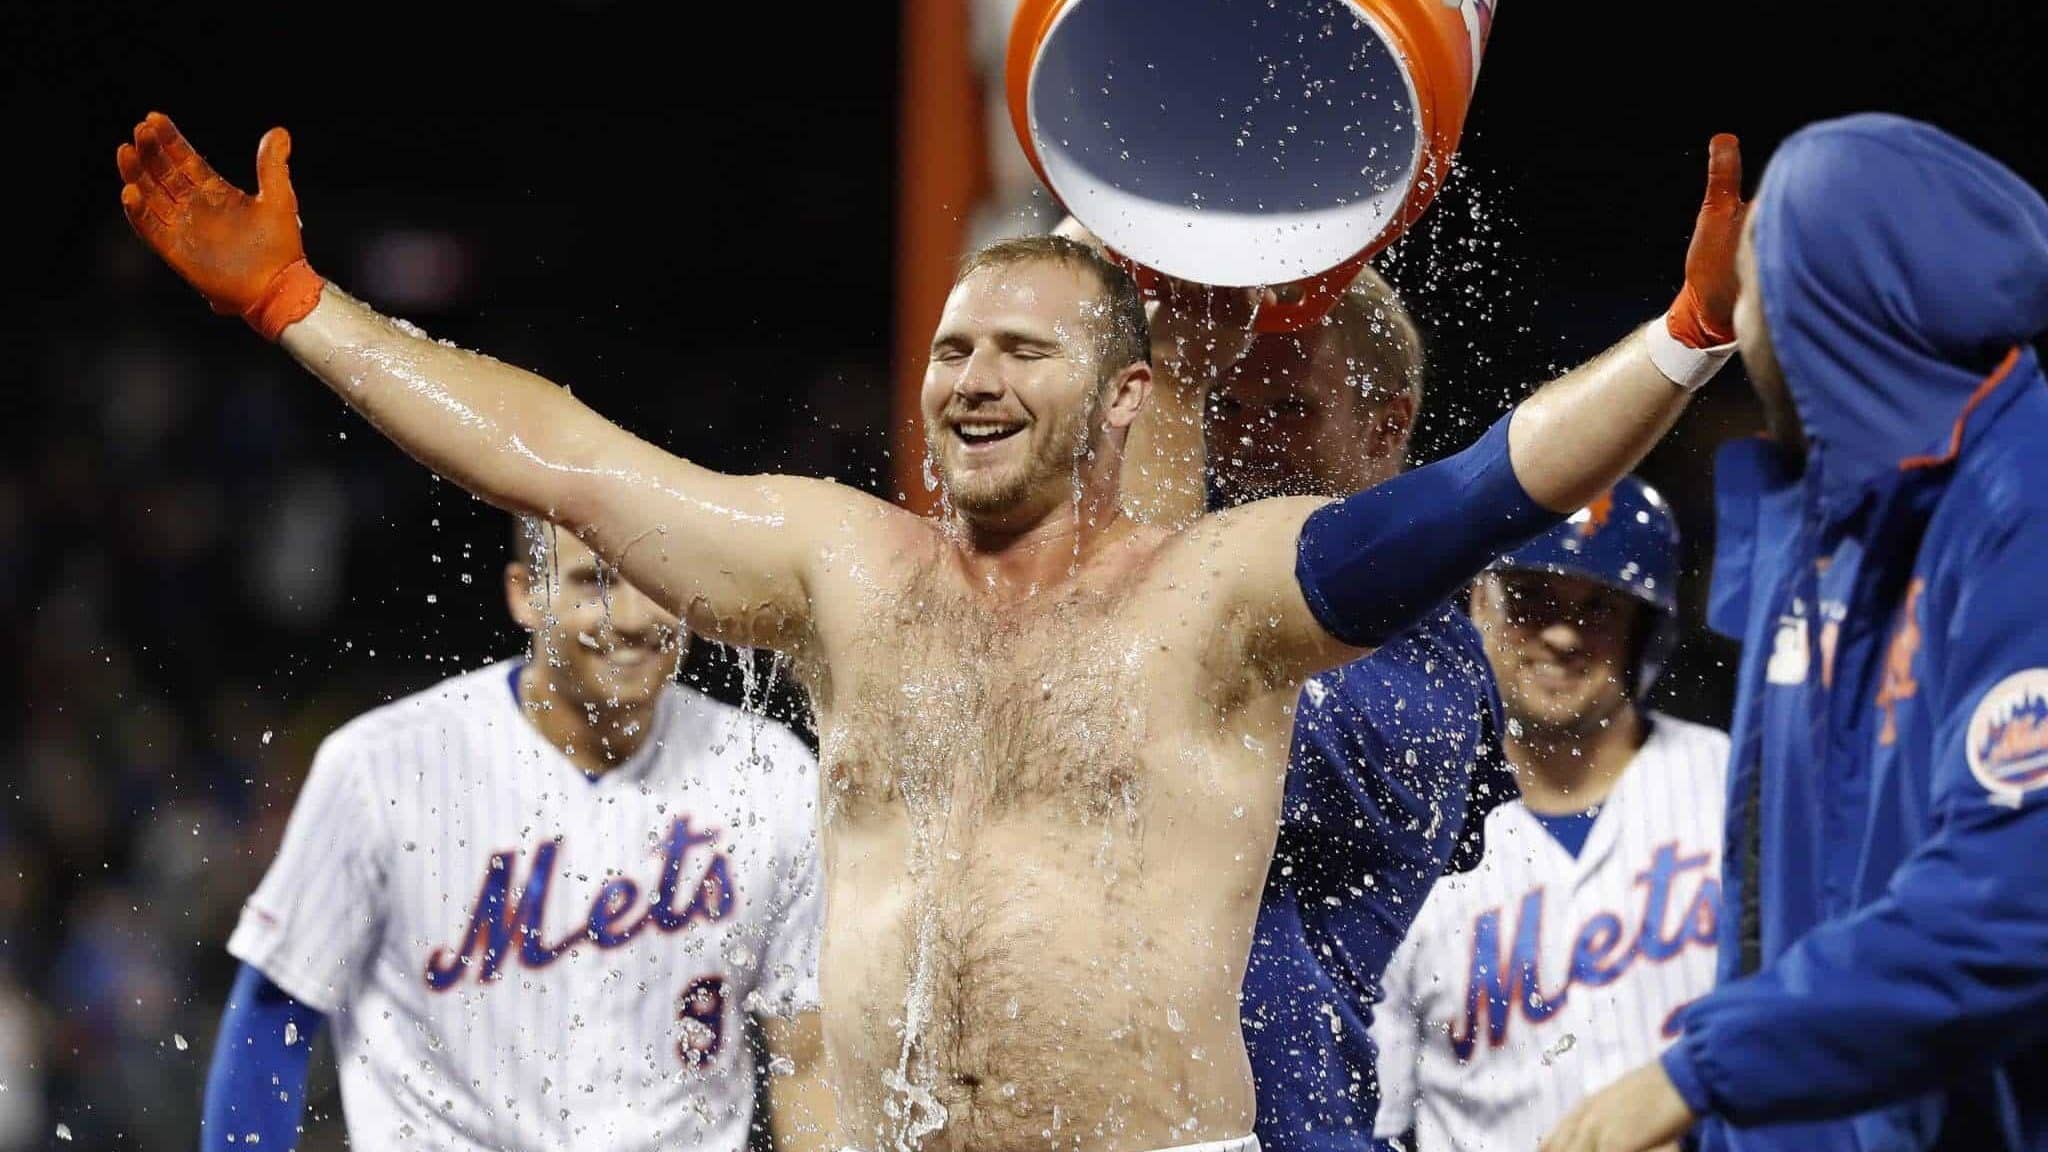 NEW YORK, NEW YORK - SEPTEMBER 06: Pete Alonso #20 of the New York Mets celebrates with teammates after defeating the Philadelphia Phillies with a walk-off walk in the ninth inning during a game at Citi Field on September 06, 2019 in New York City. The Mets defeated the Phillies 5-4.